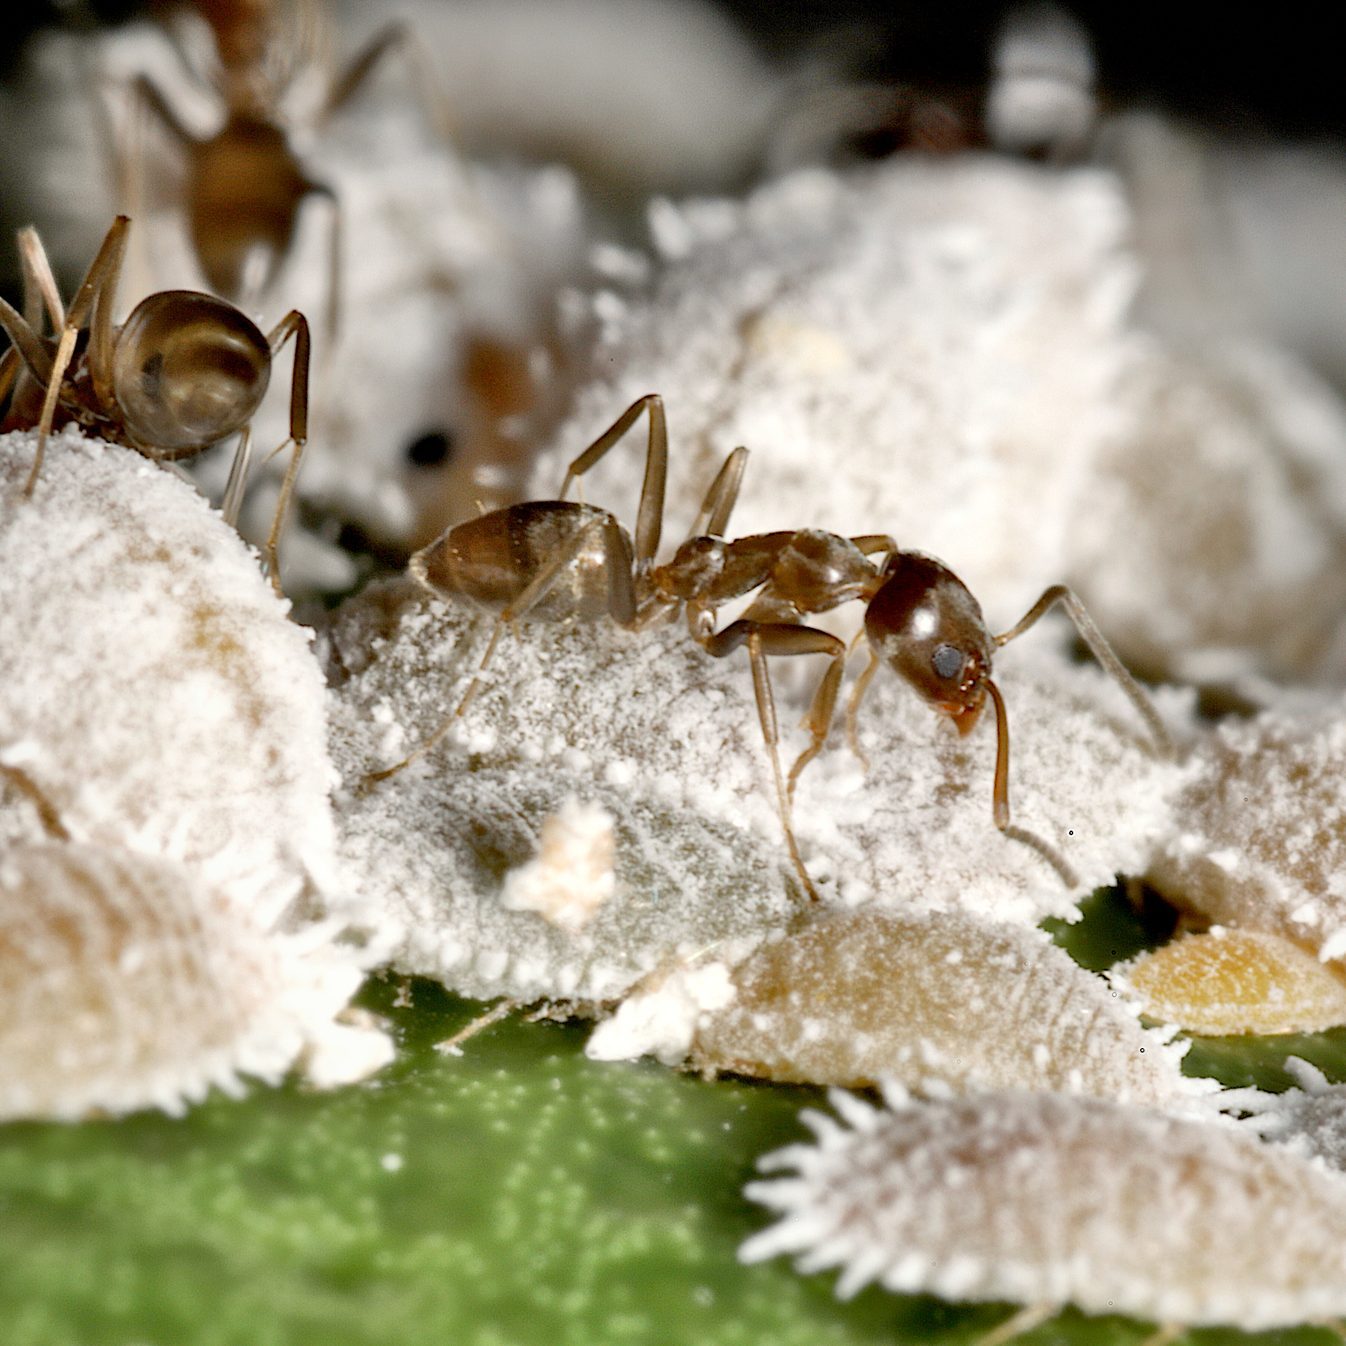 Argentine Ants (Linepithema humile) farming Citrus Mealy Bugs (Planococcus citri)